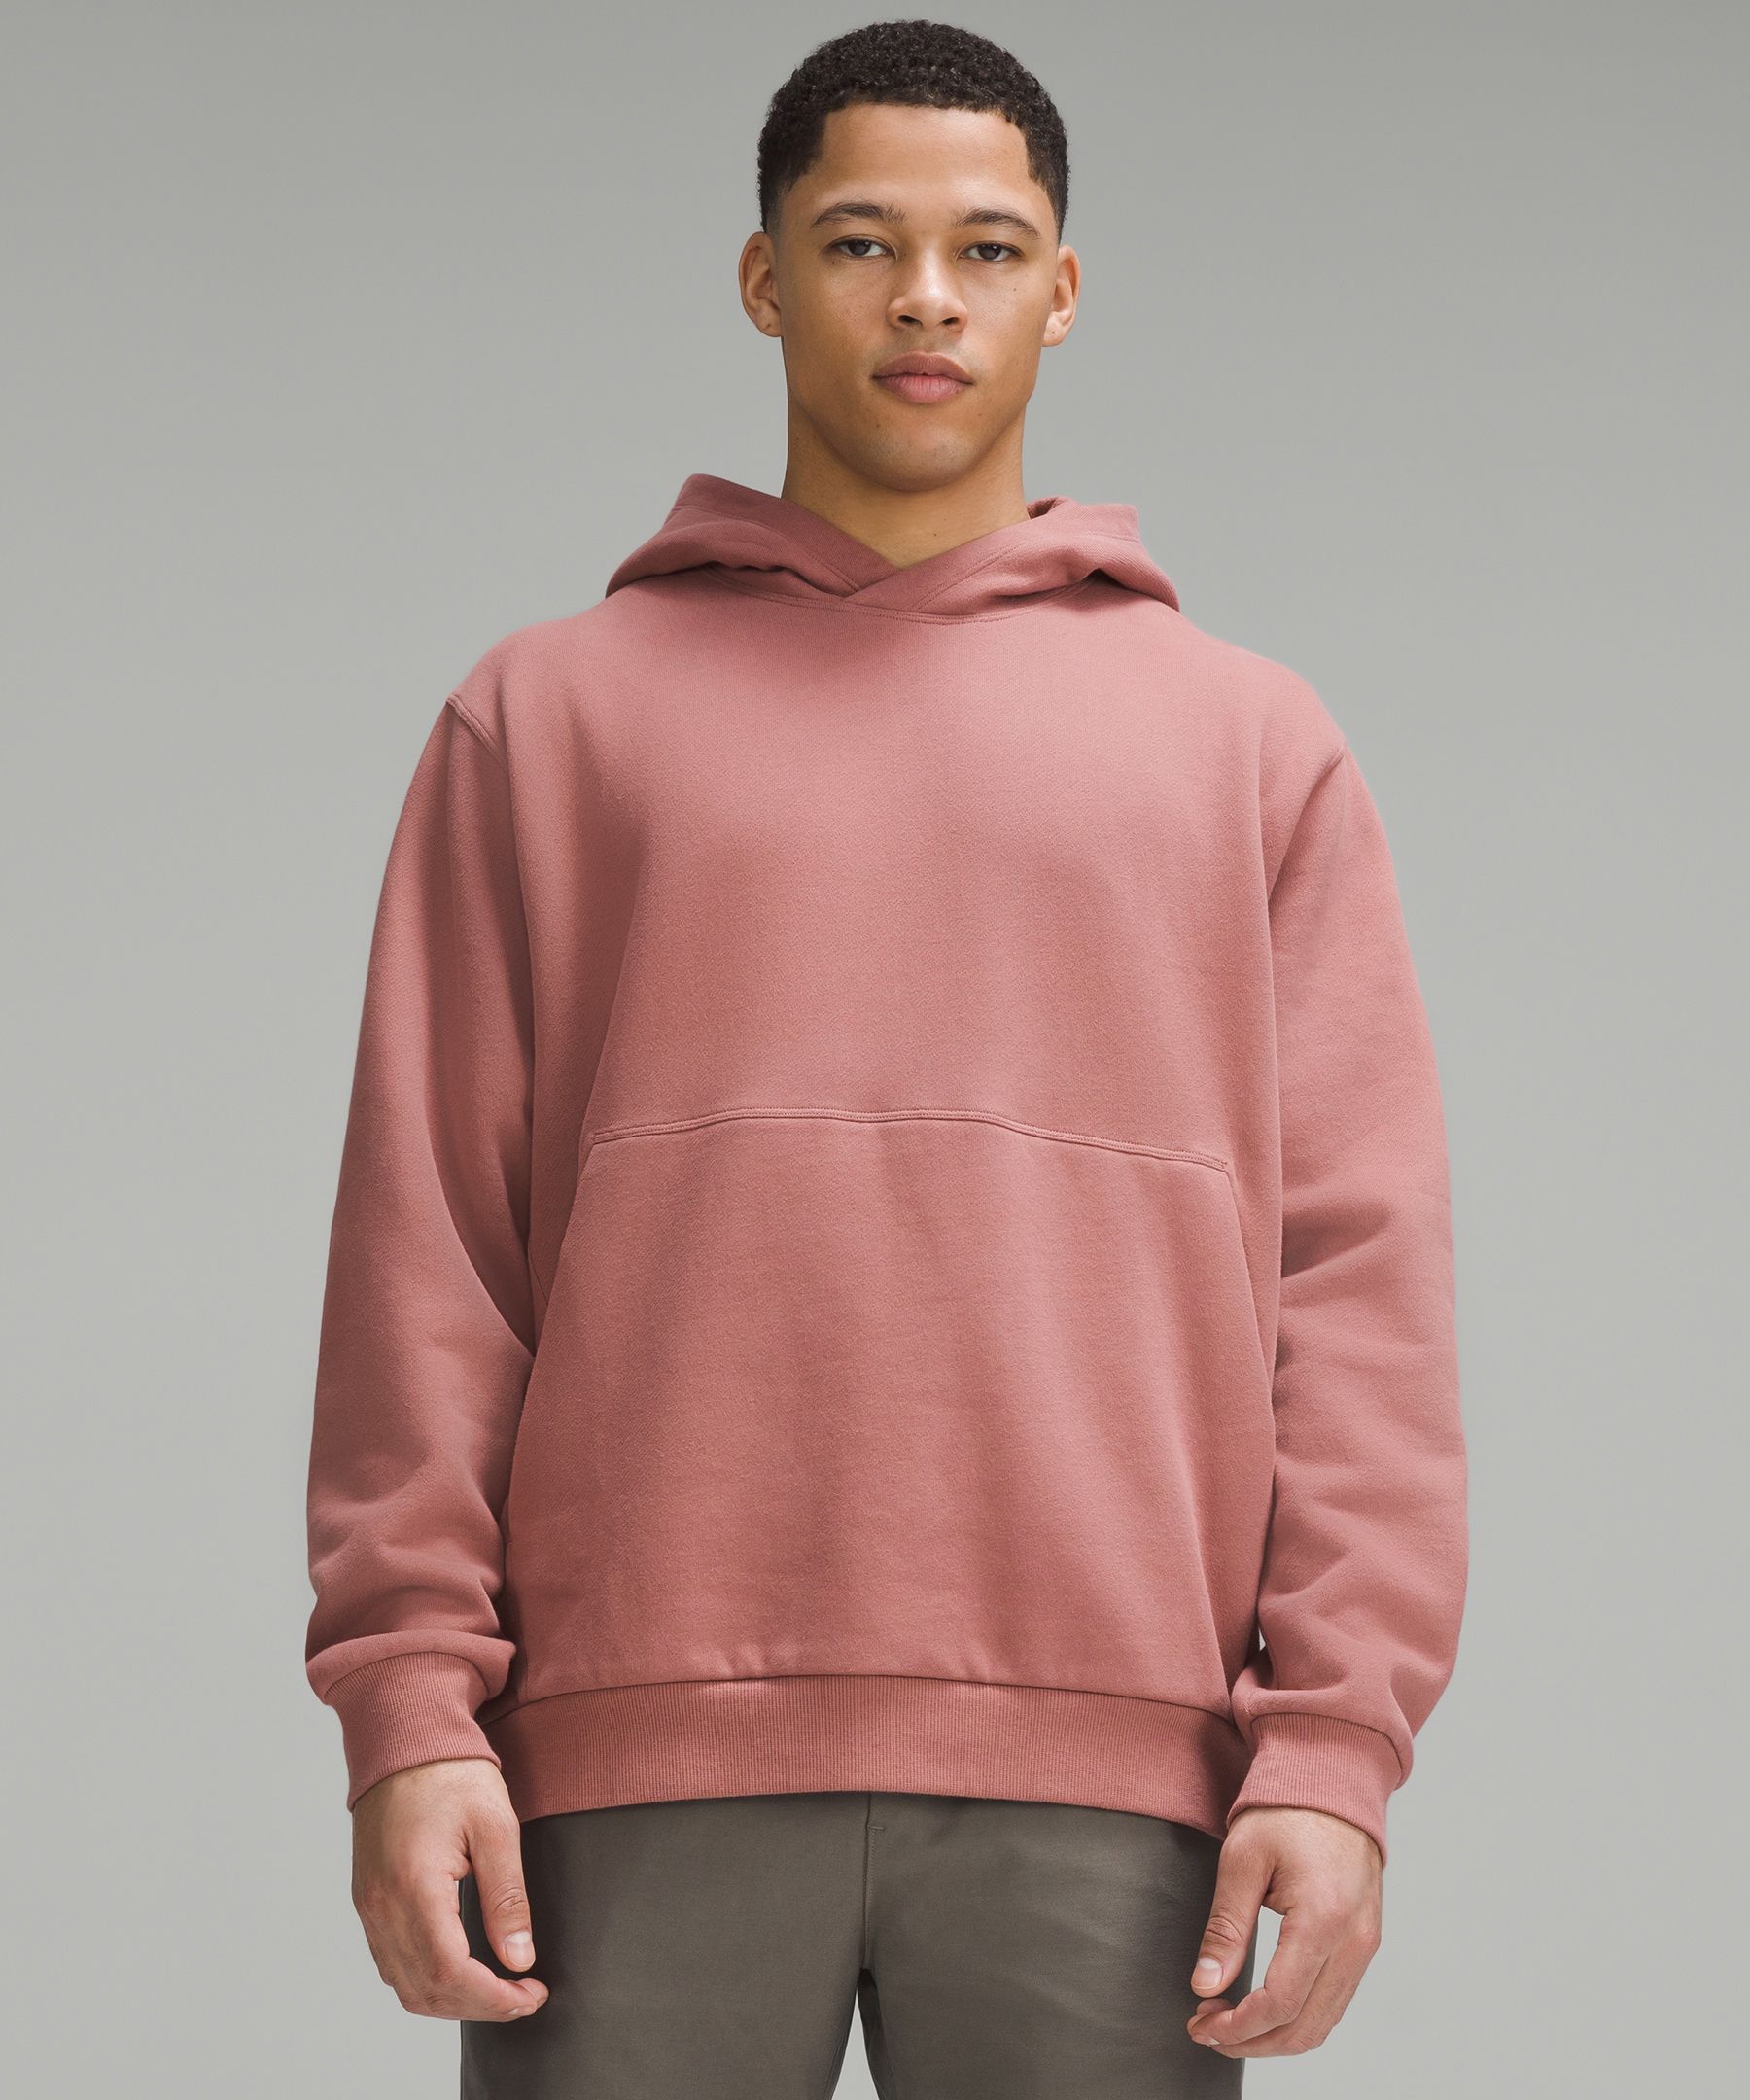 image trick finds] steady state hoodie (???grey?, dramatic magenta